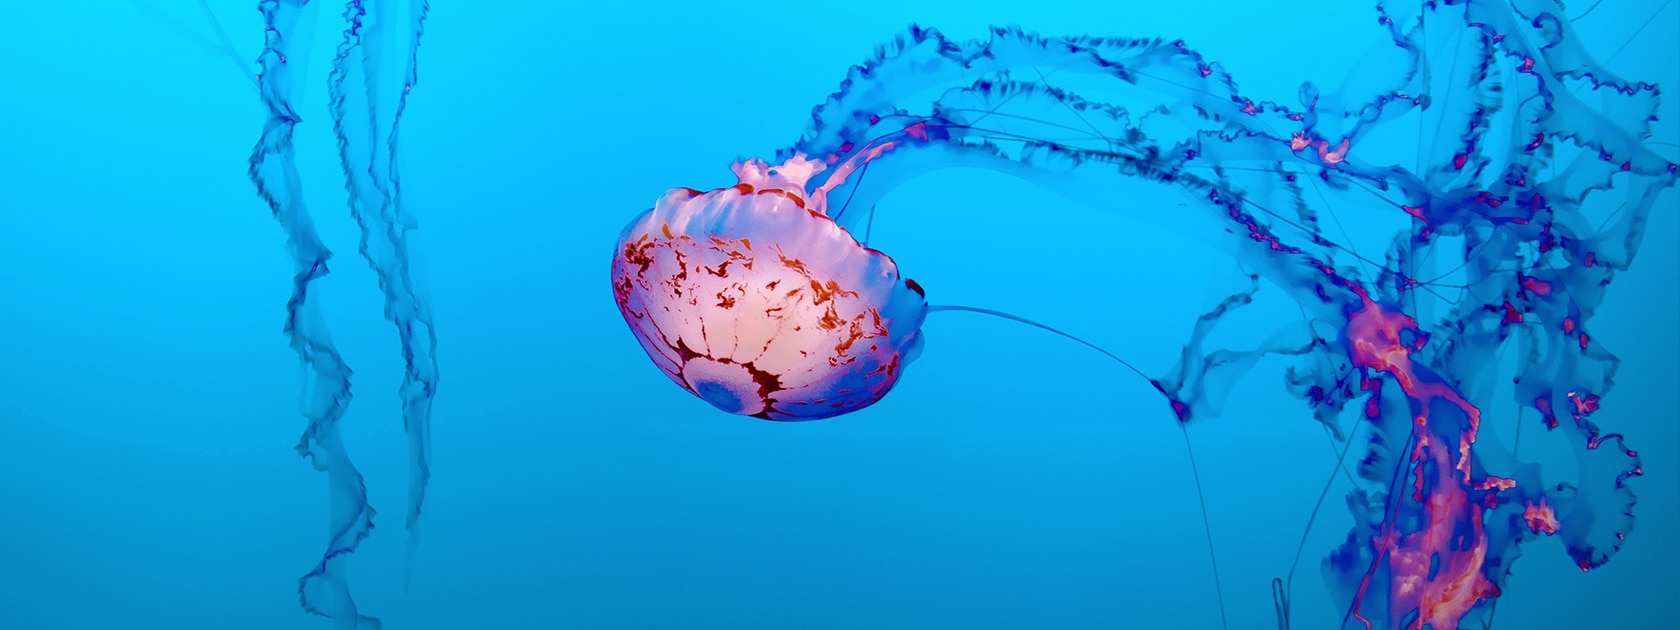 a purple jellyfish floats in bright blue water